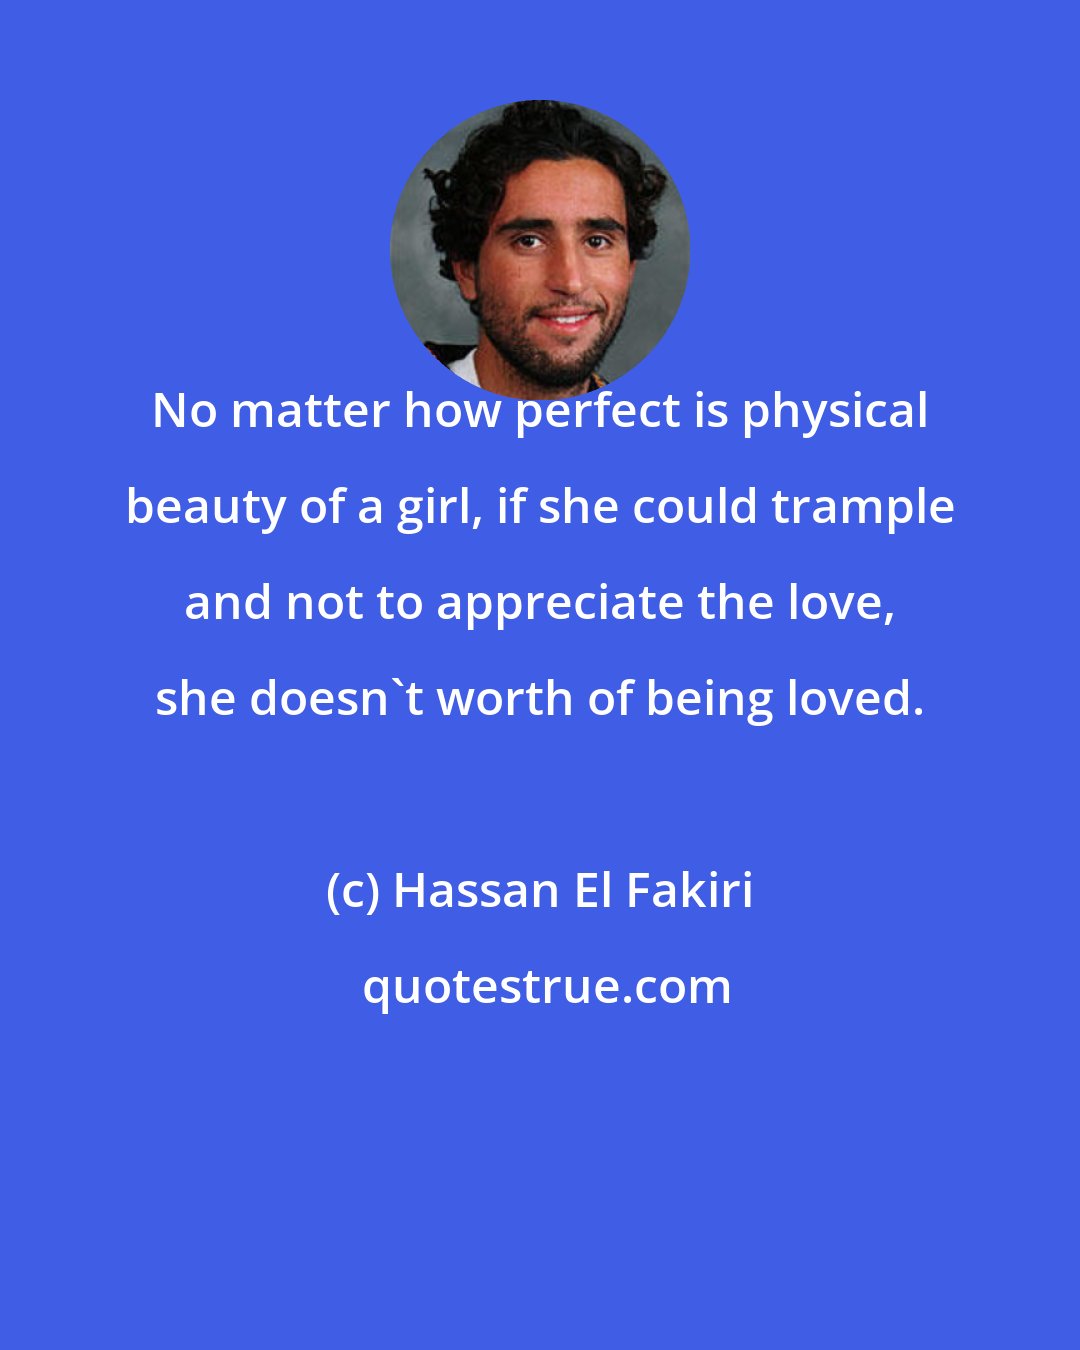 Hassan El Fakiri: No matter how perfect is physical beauty of a girl, if she could trample and not to appreciate the love, she doesn't worth of being loved.